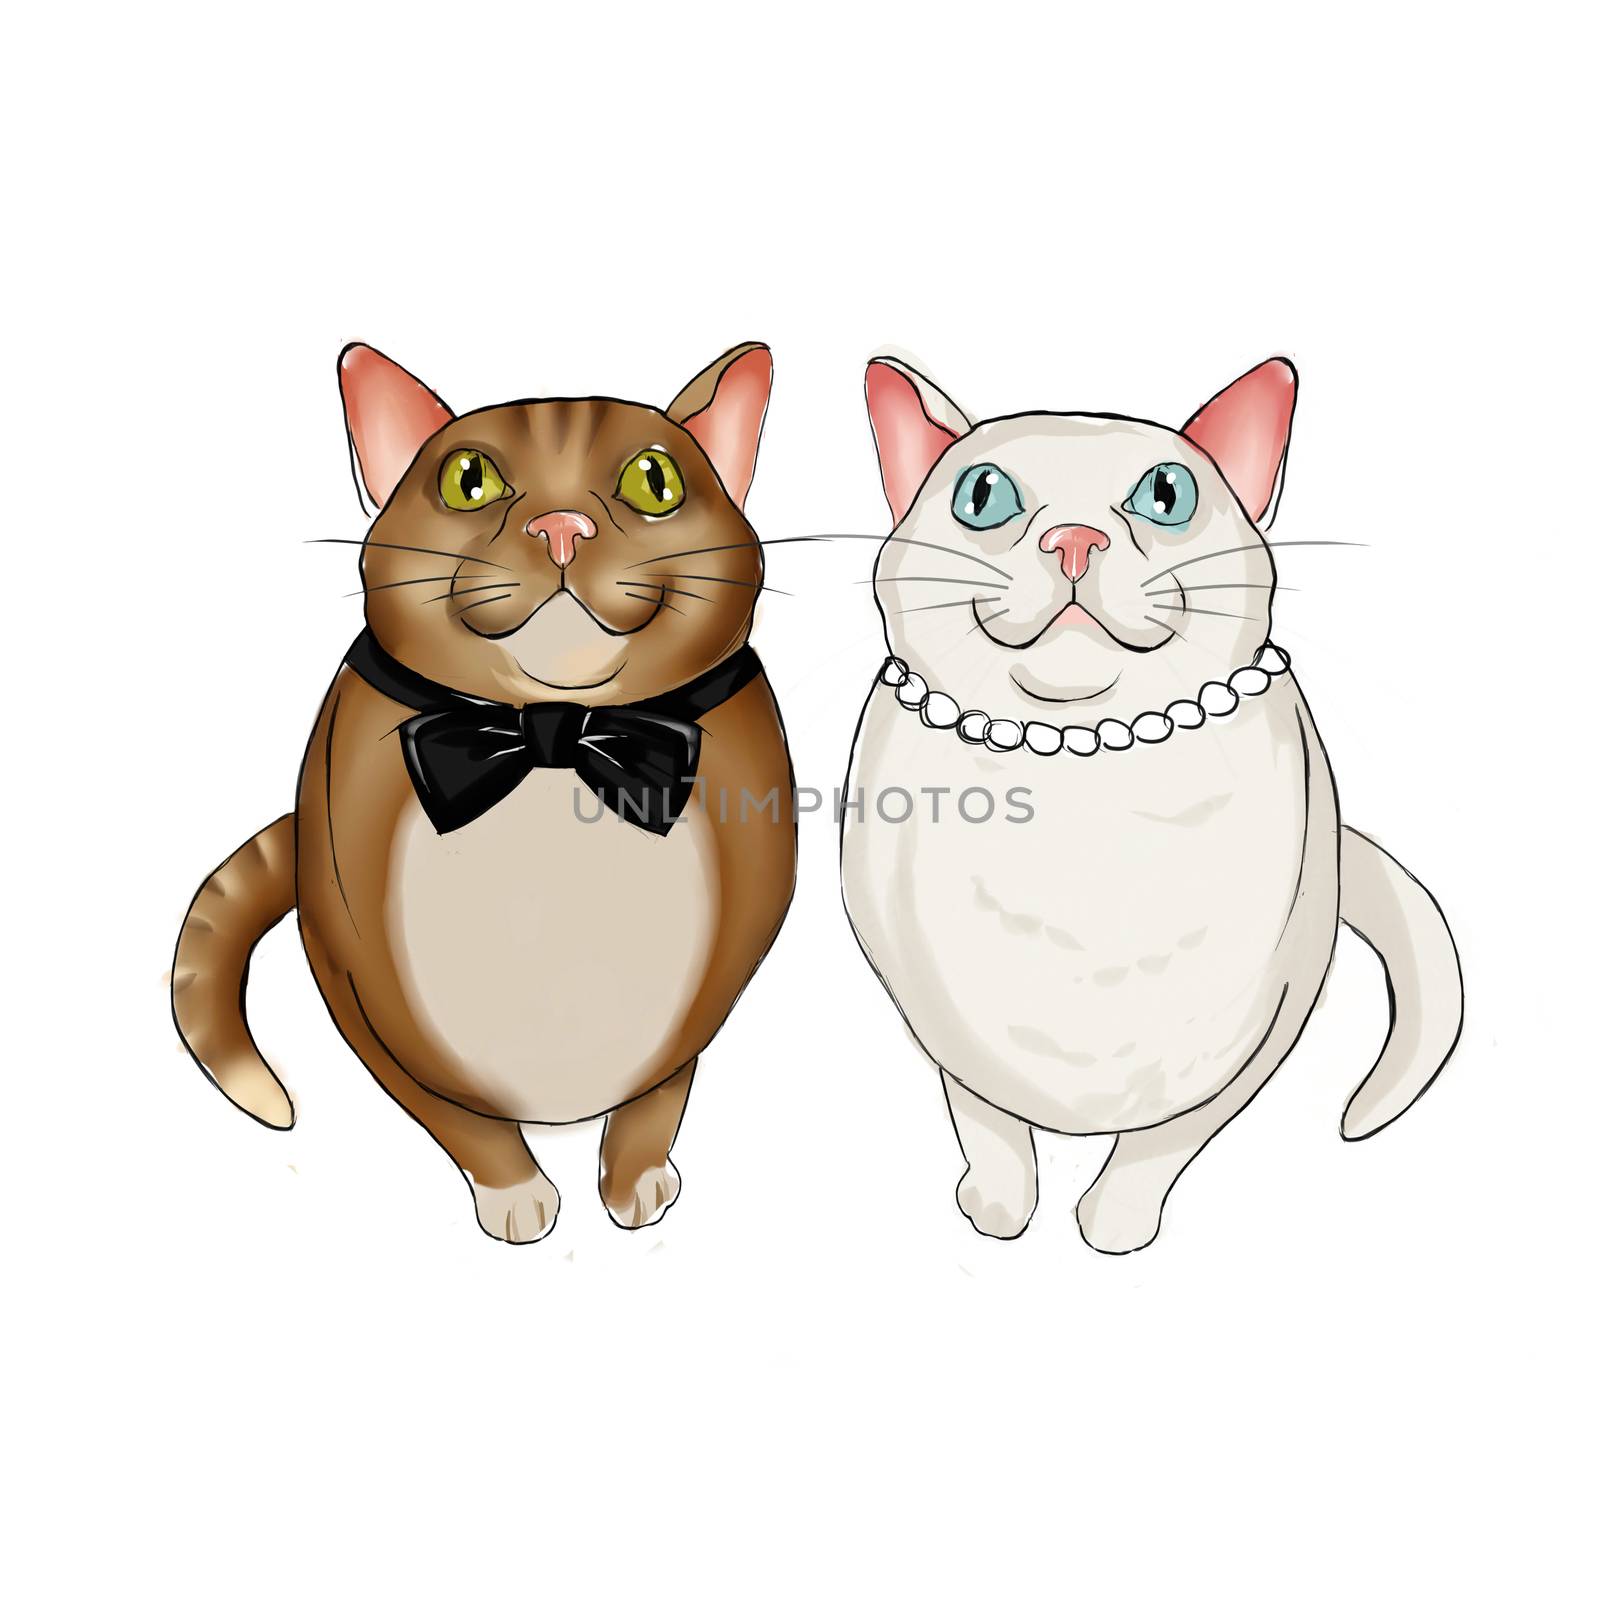 Adorable couple of felines wearing bridal accessories by GGillustrations